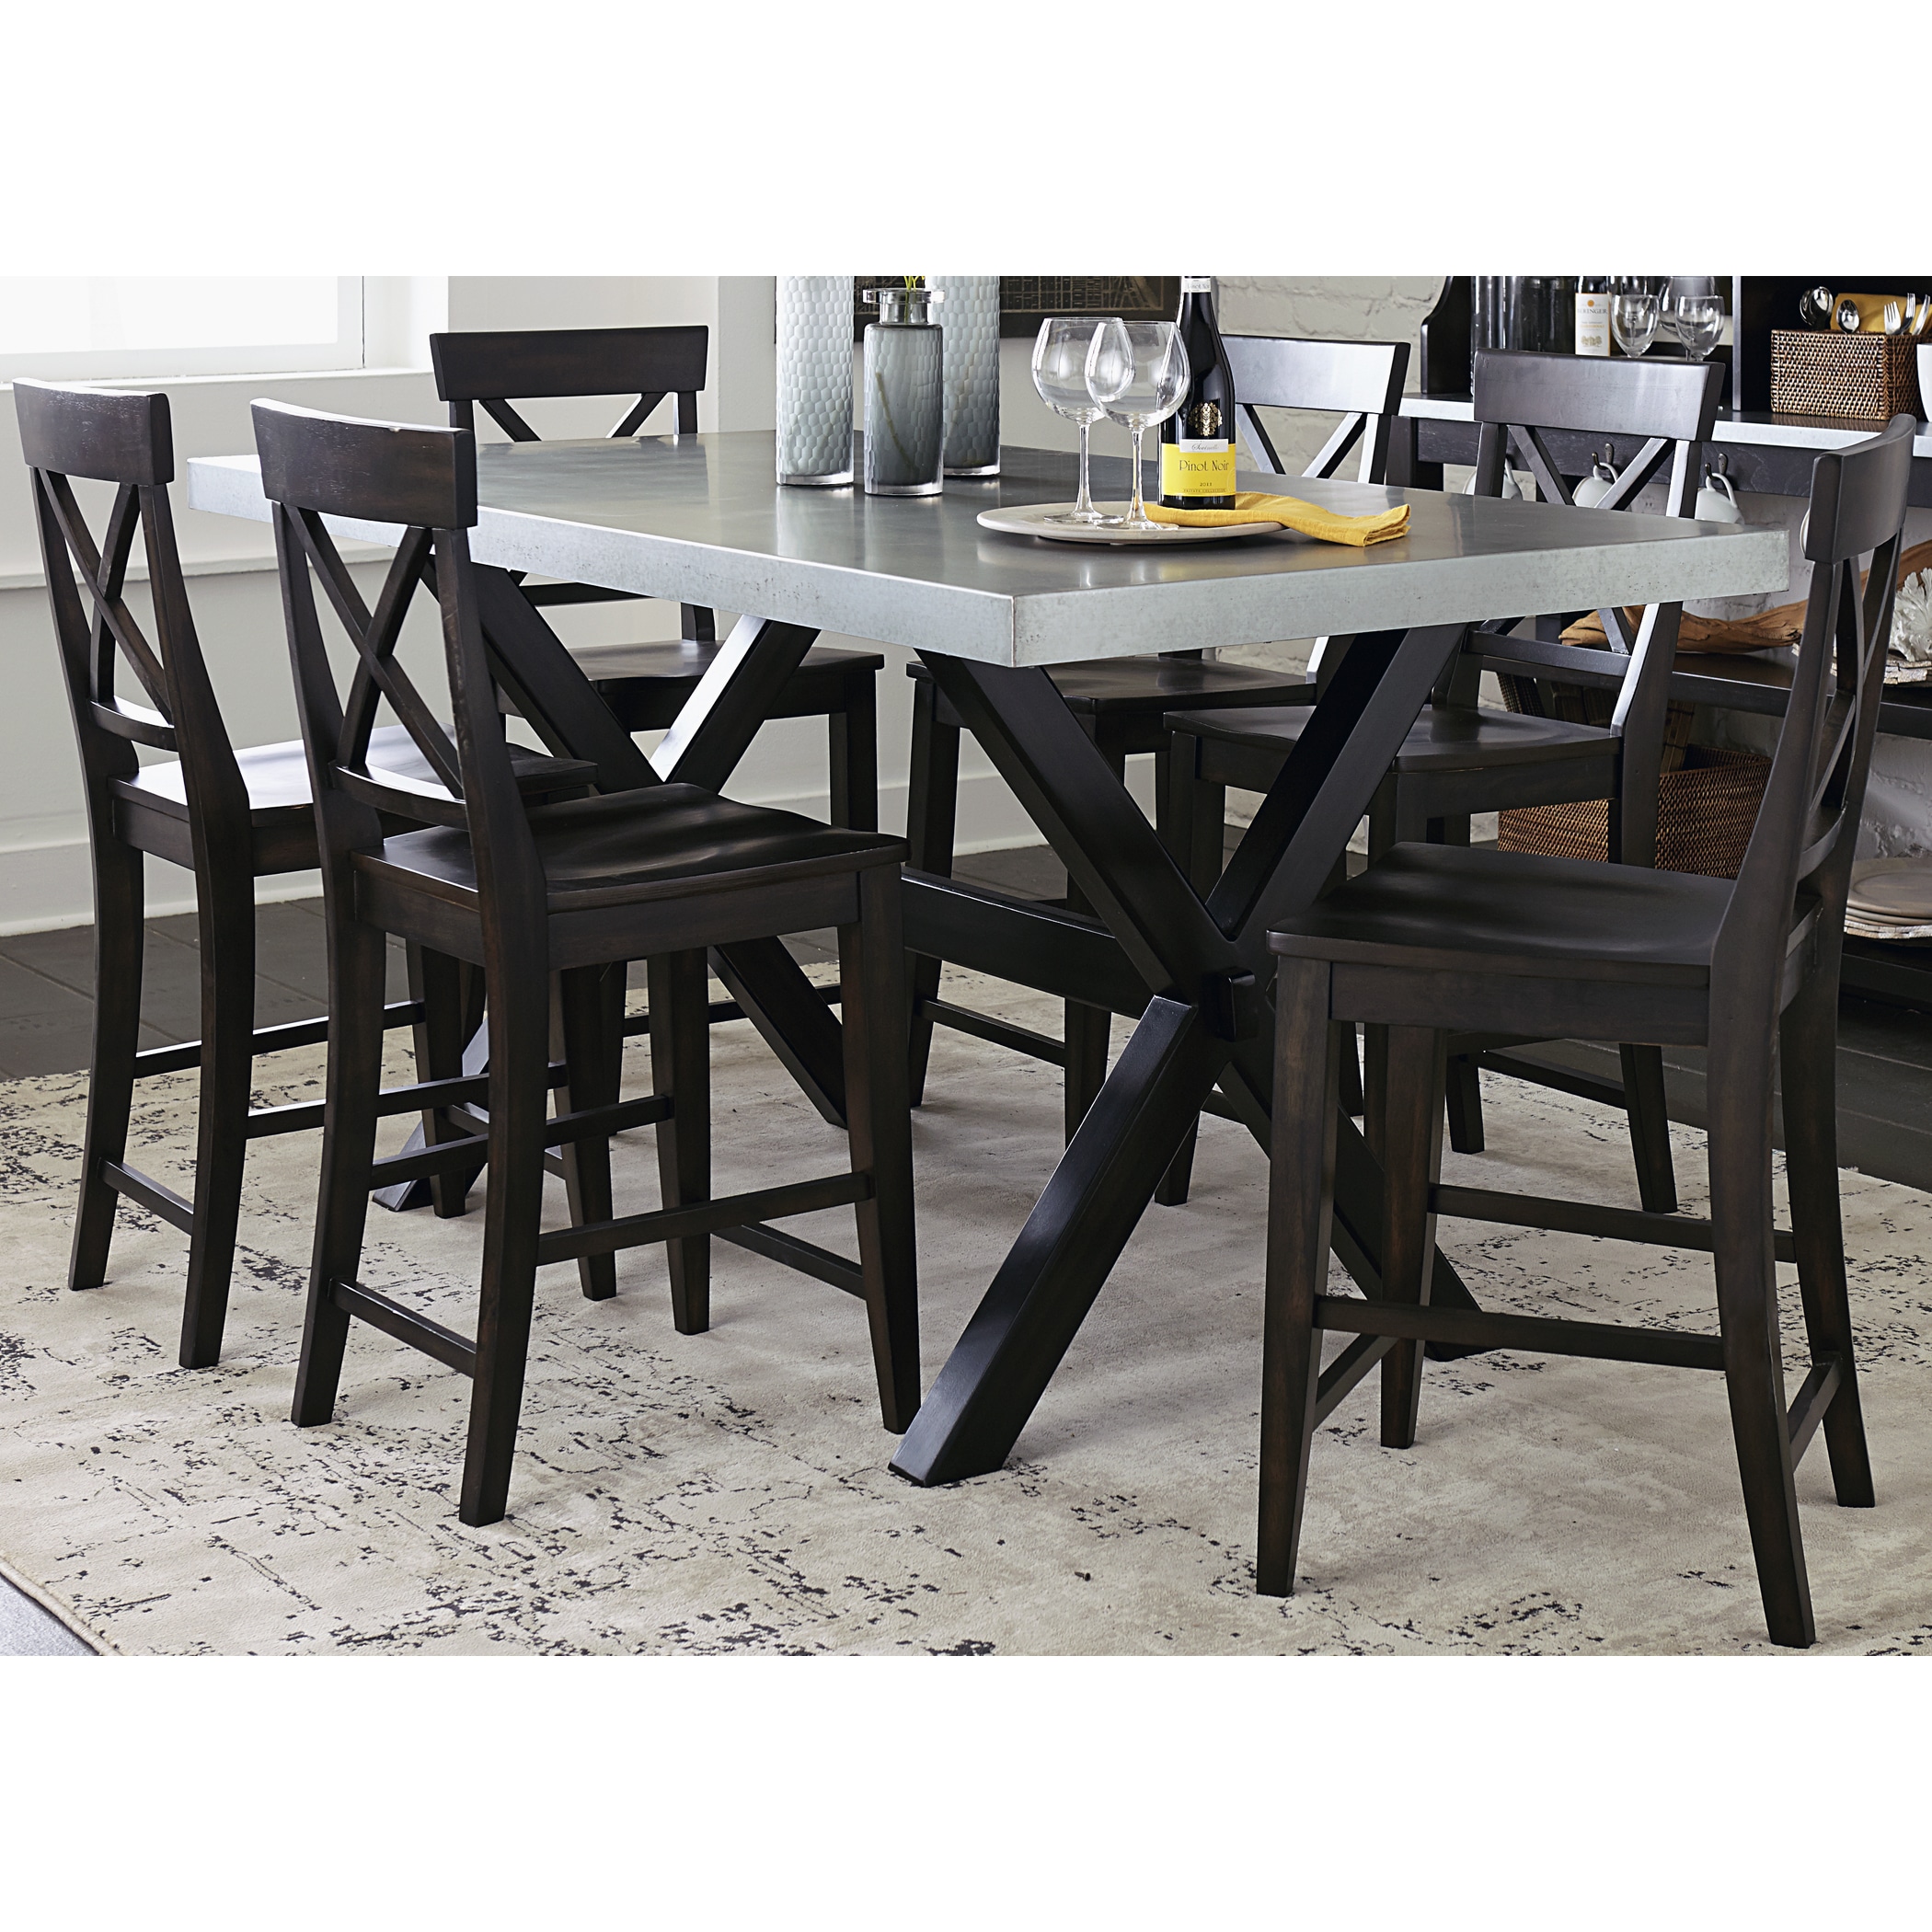 Shop Black Friday Deals On The Gray Barn Outerlands Charcoal And Zinc Top Testle Gathering Table Overstock 20882540